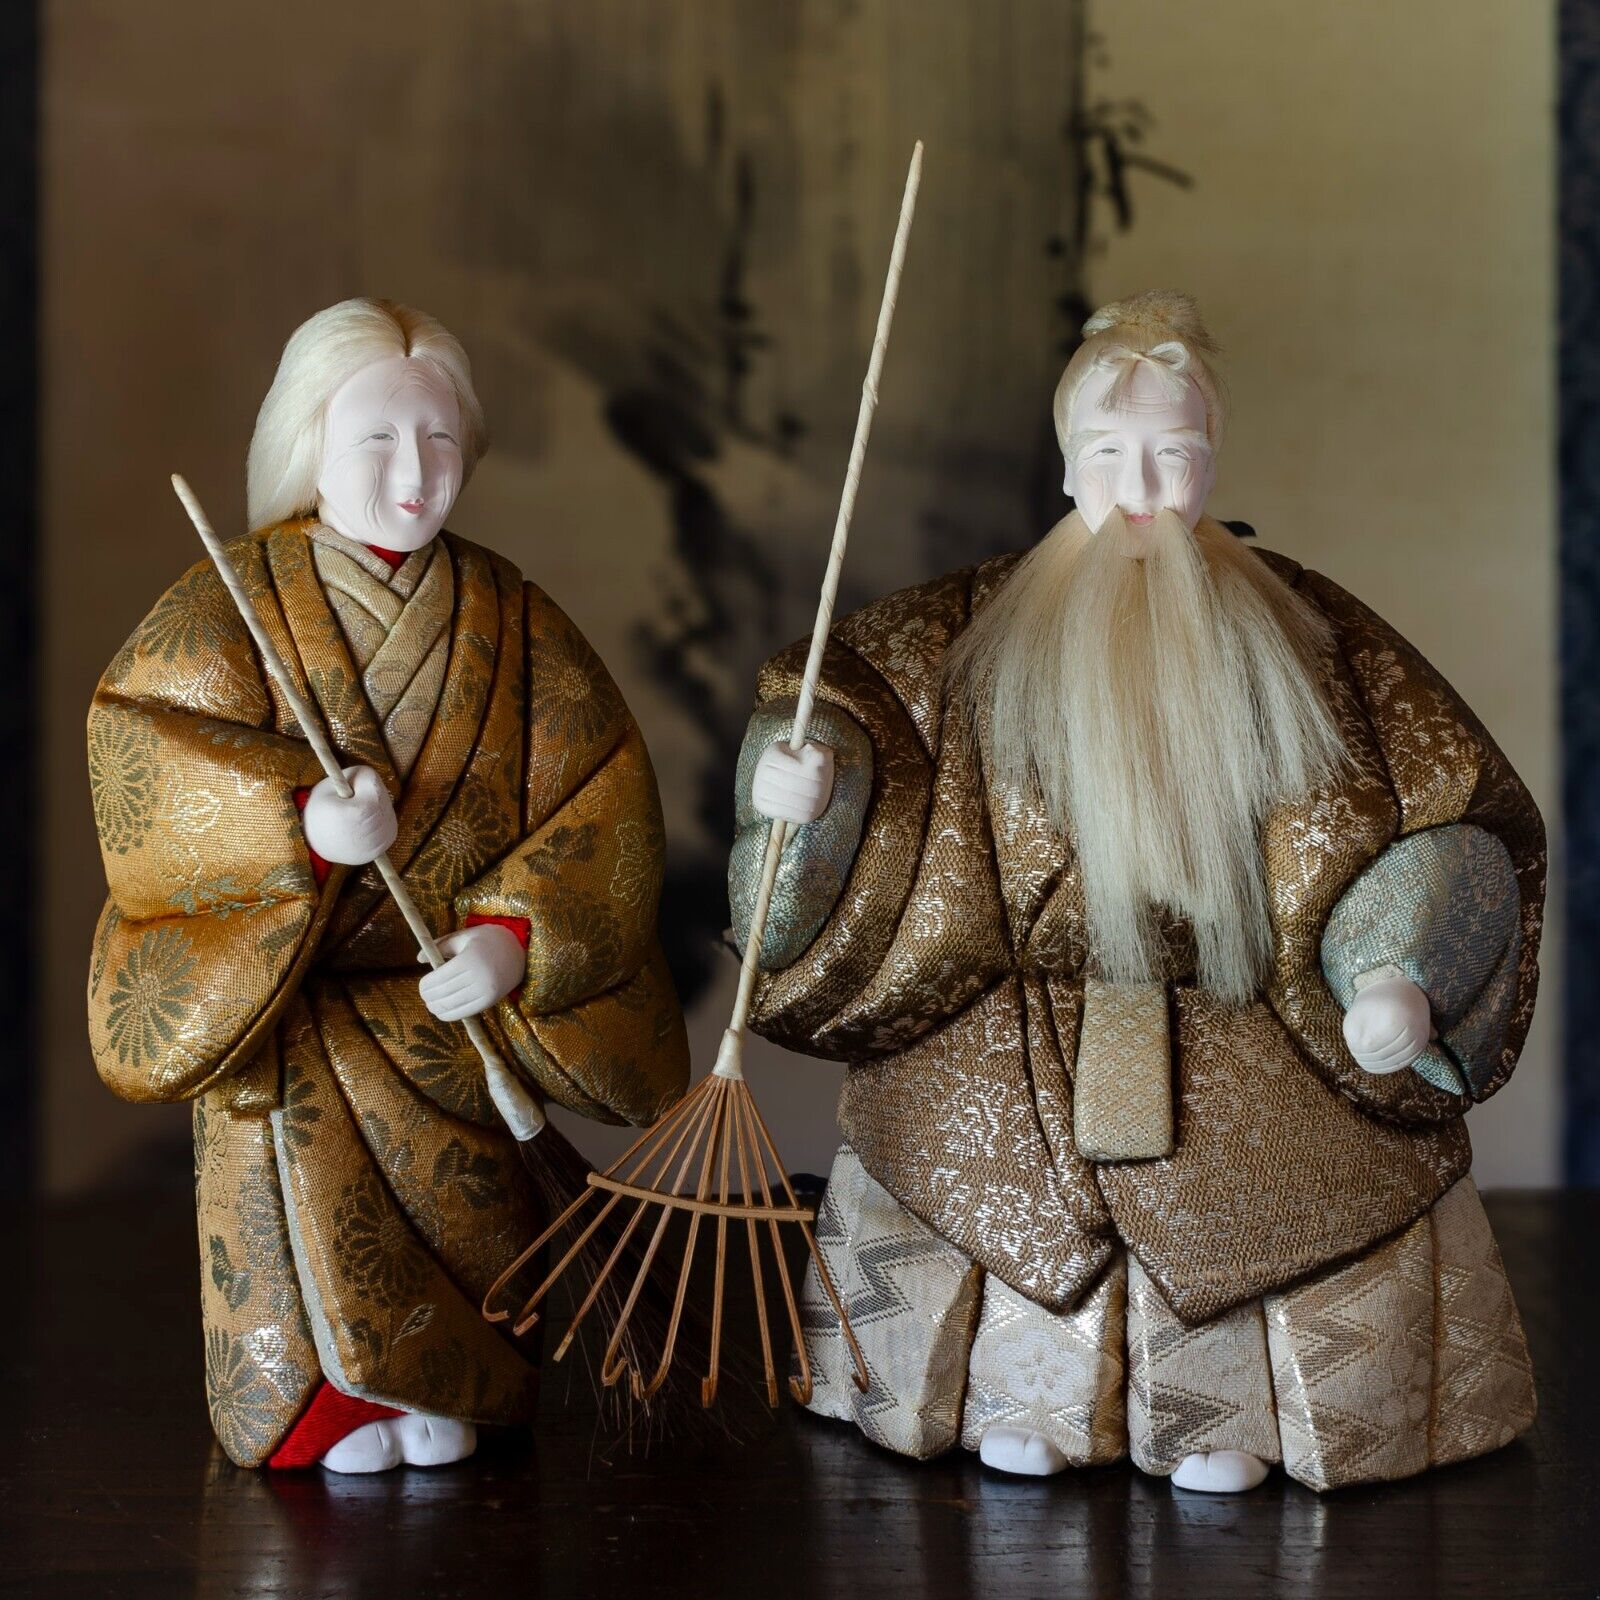 Japanese Vintage Dolls of Old Farmers, Handmade in Traditional Attire Set of Two